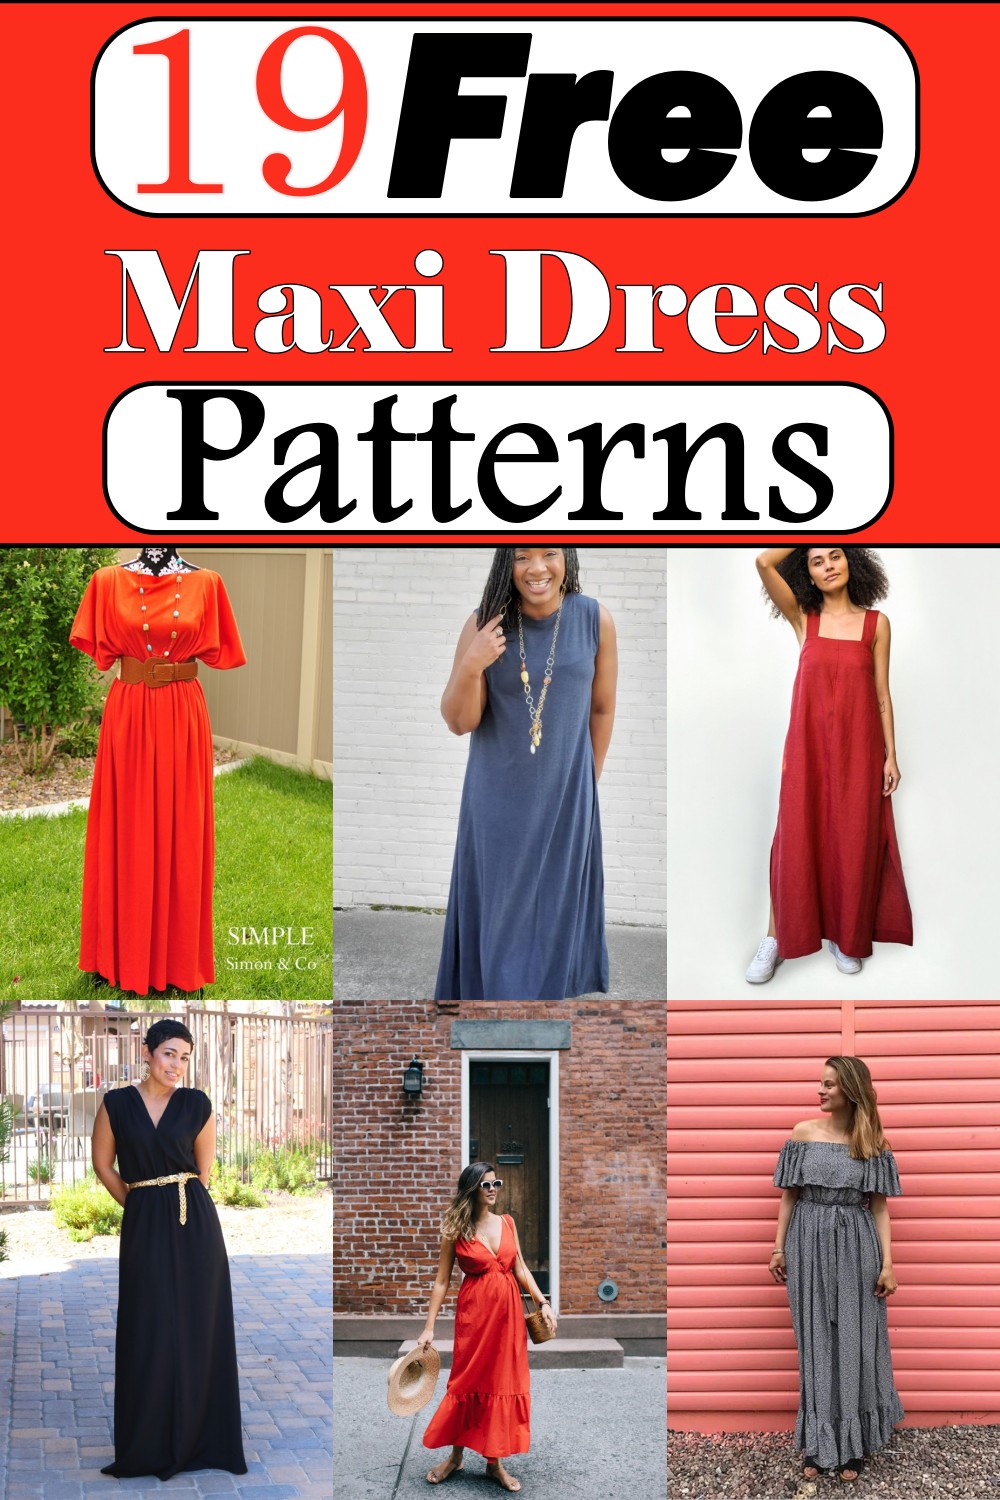 19 Free Maxi Dress Patterns For Stylish Look - Craftsy